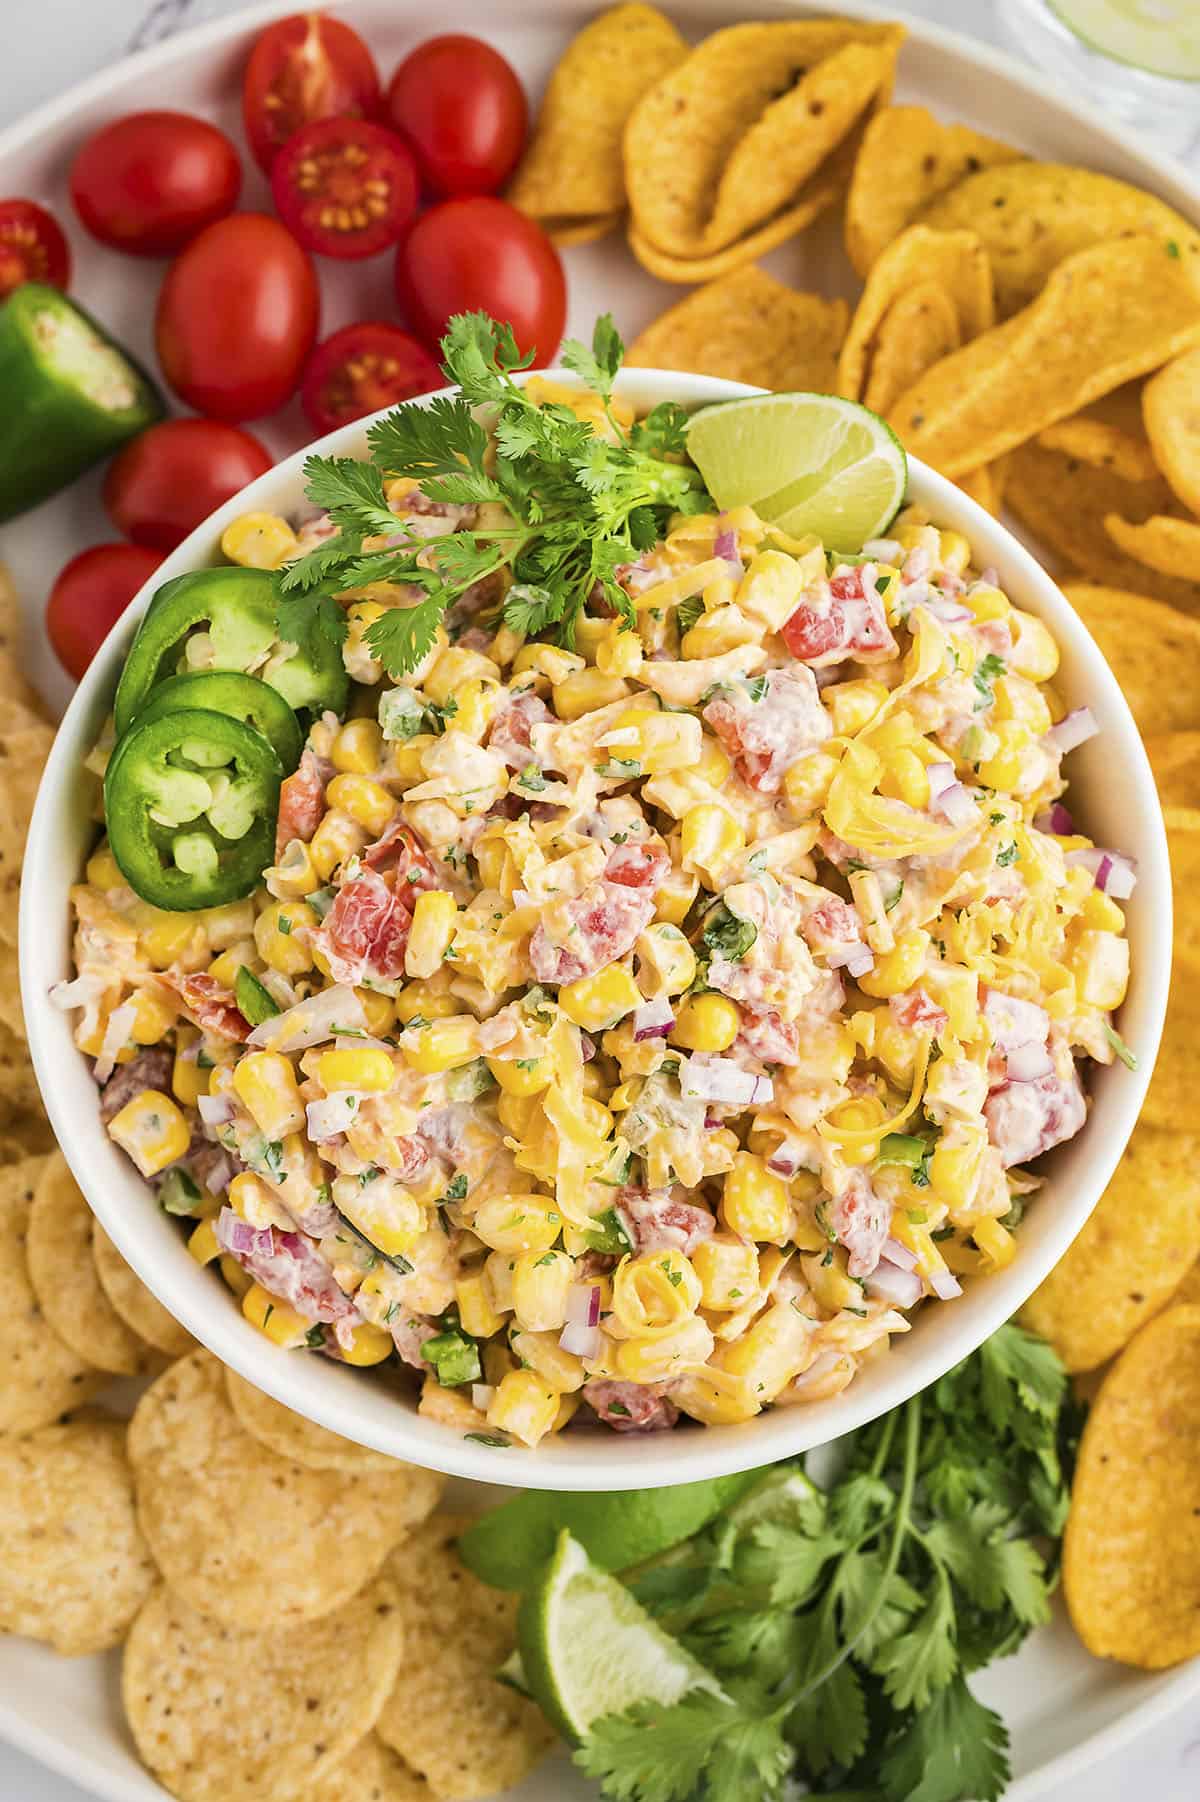 Cold corn dip in bowl surrounded by chips and vegetables.